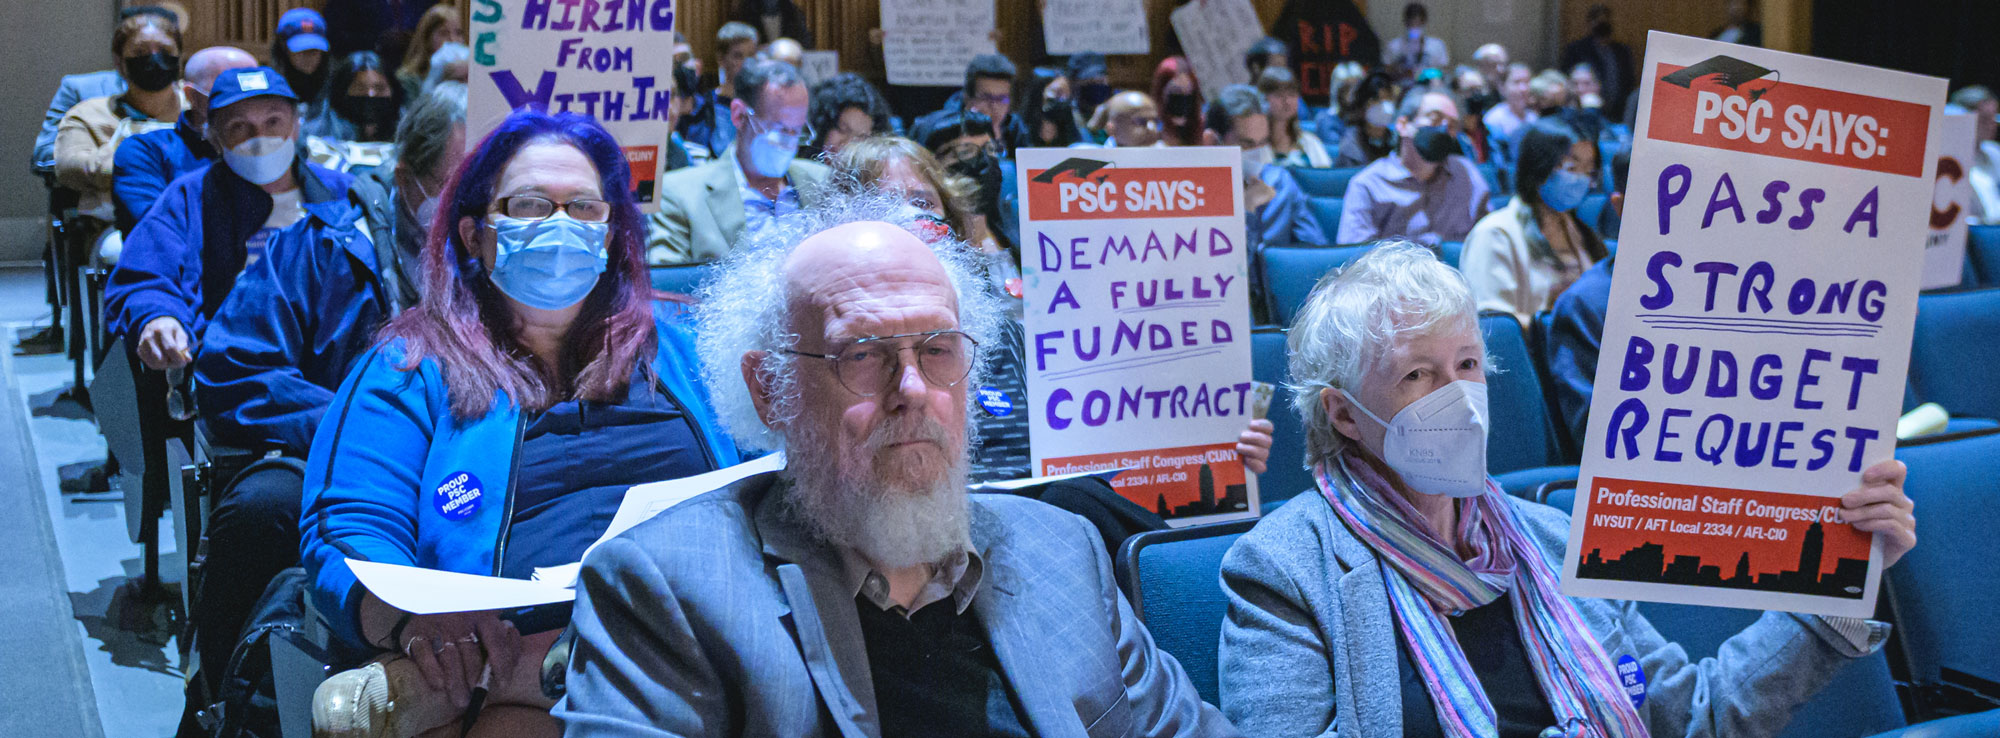 In October, members demand CUNY administration issue a strong budget request. (Erik McGregor)